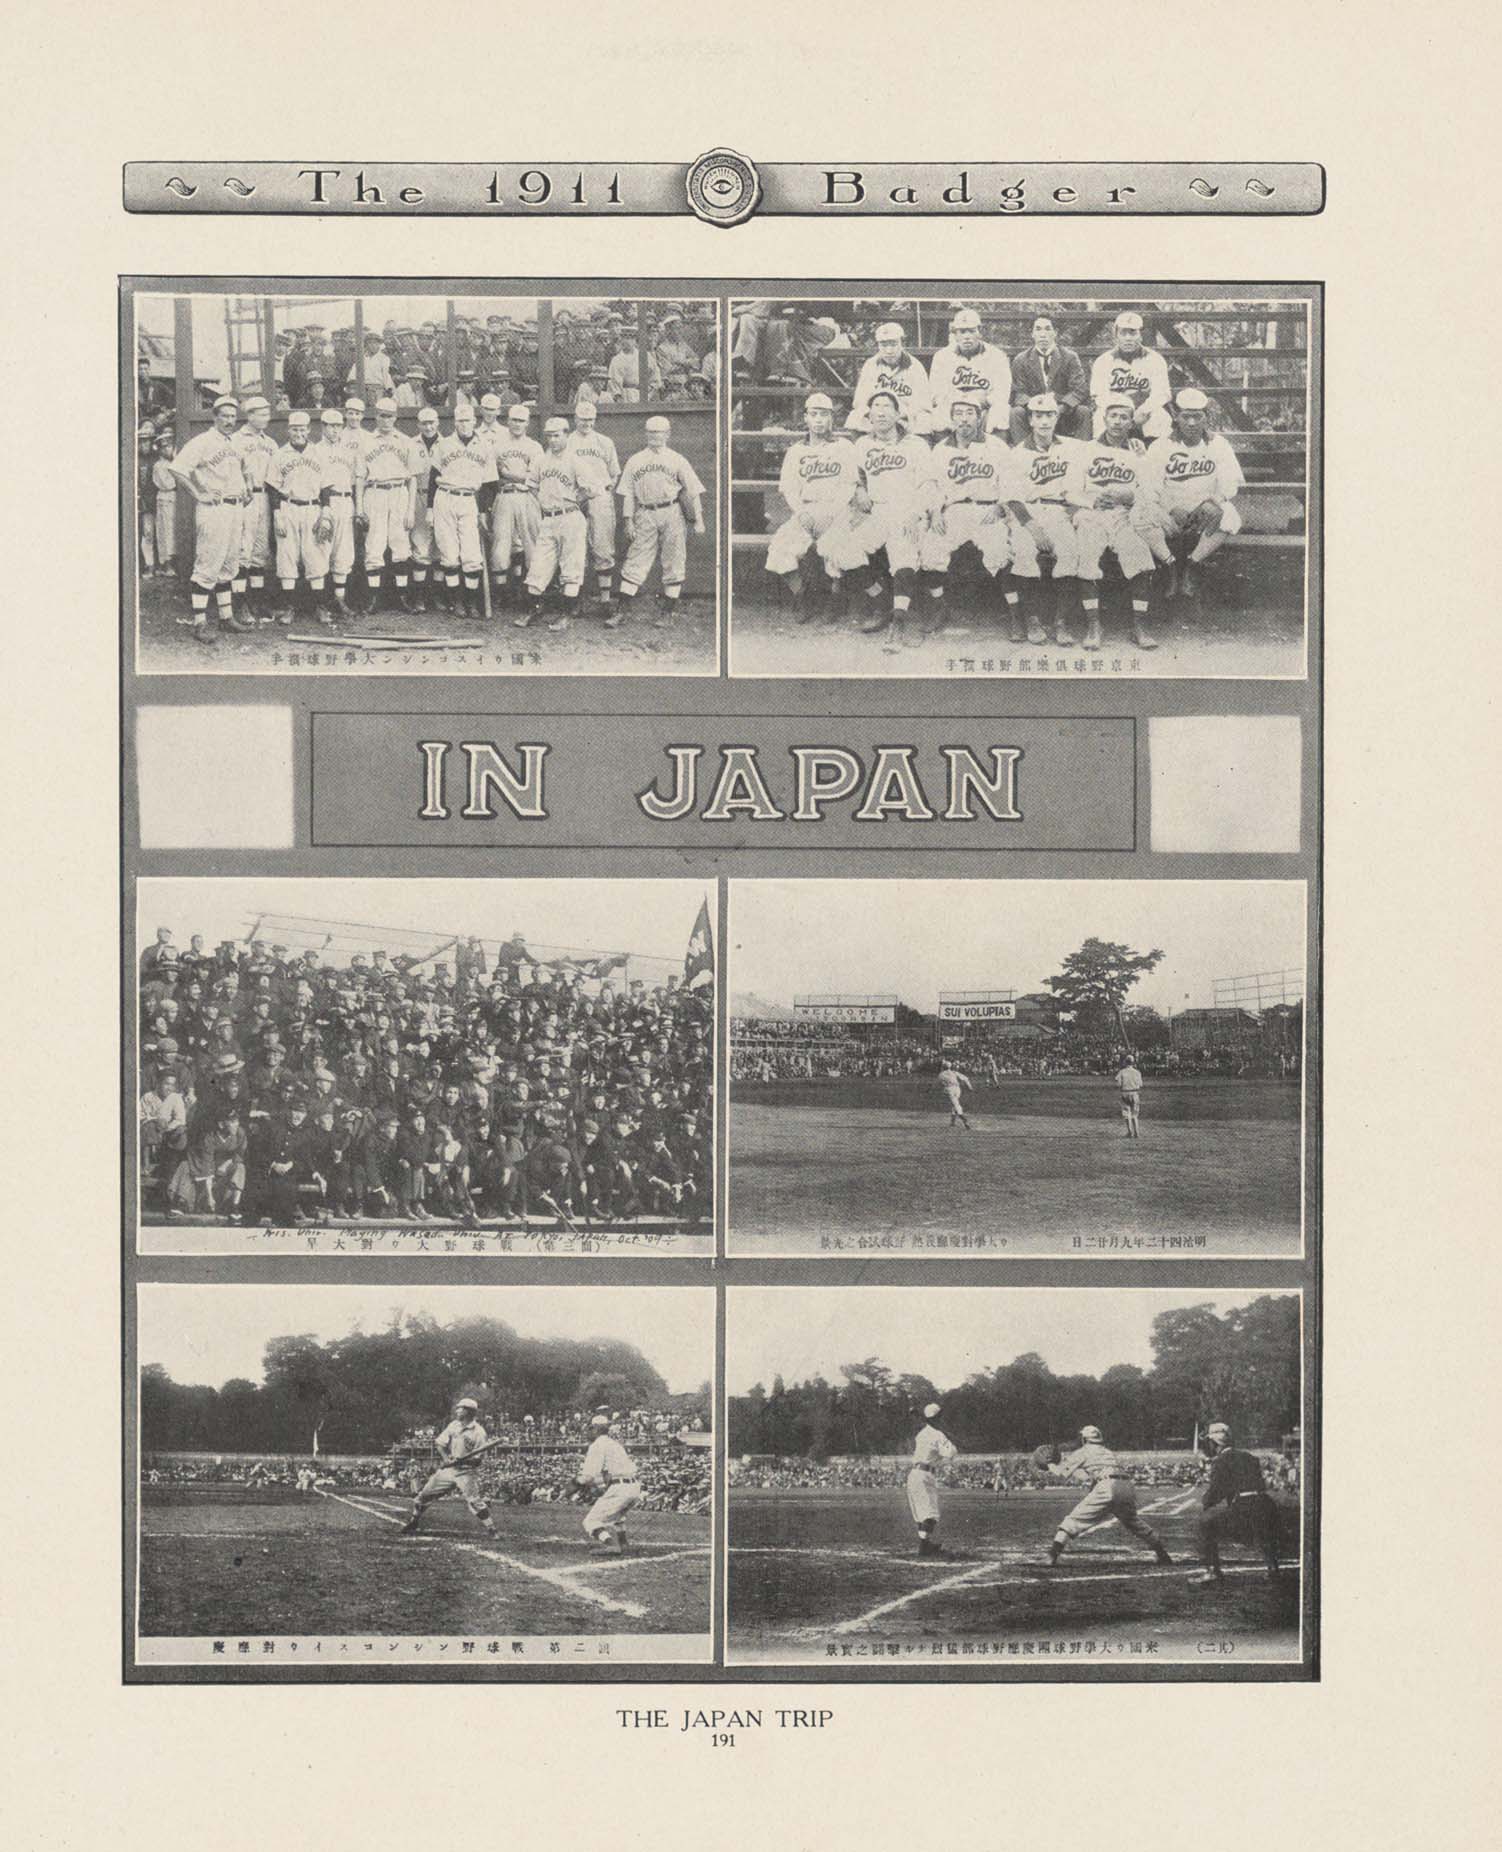 A yearbook page with six black and white photos of teams playing baseball and posing for team photos